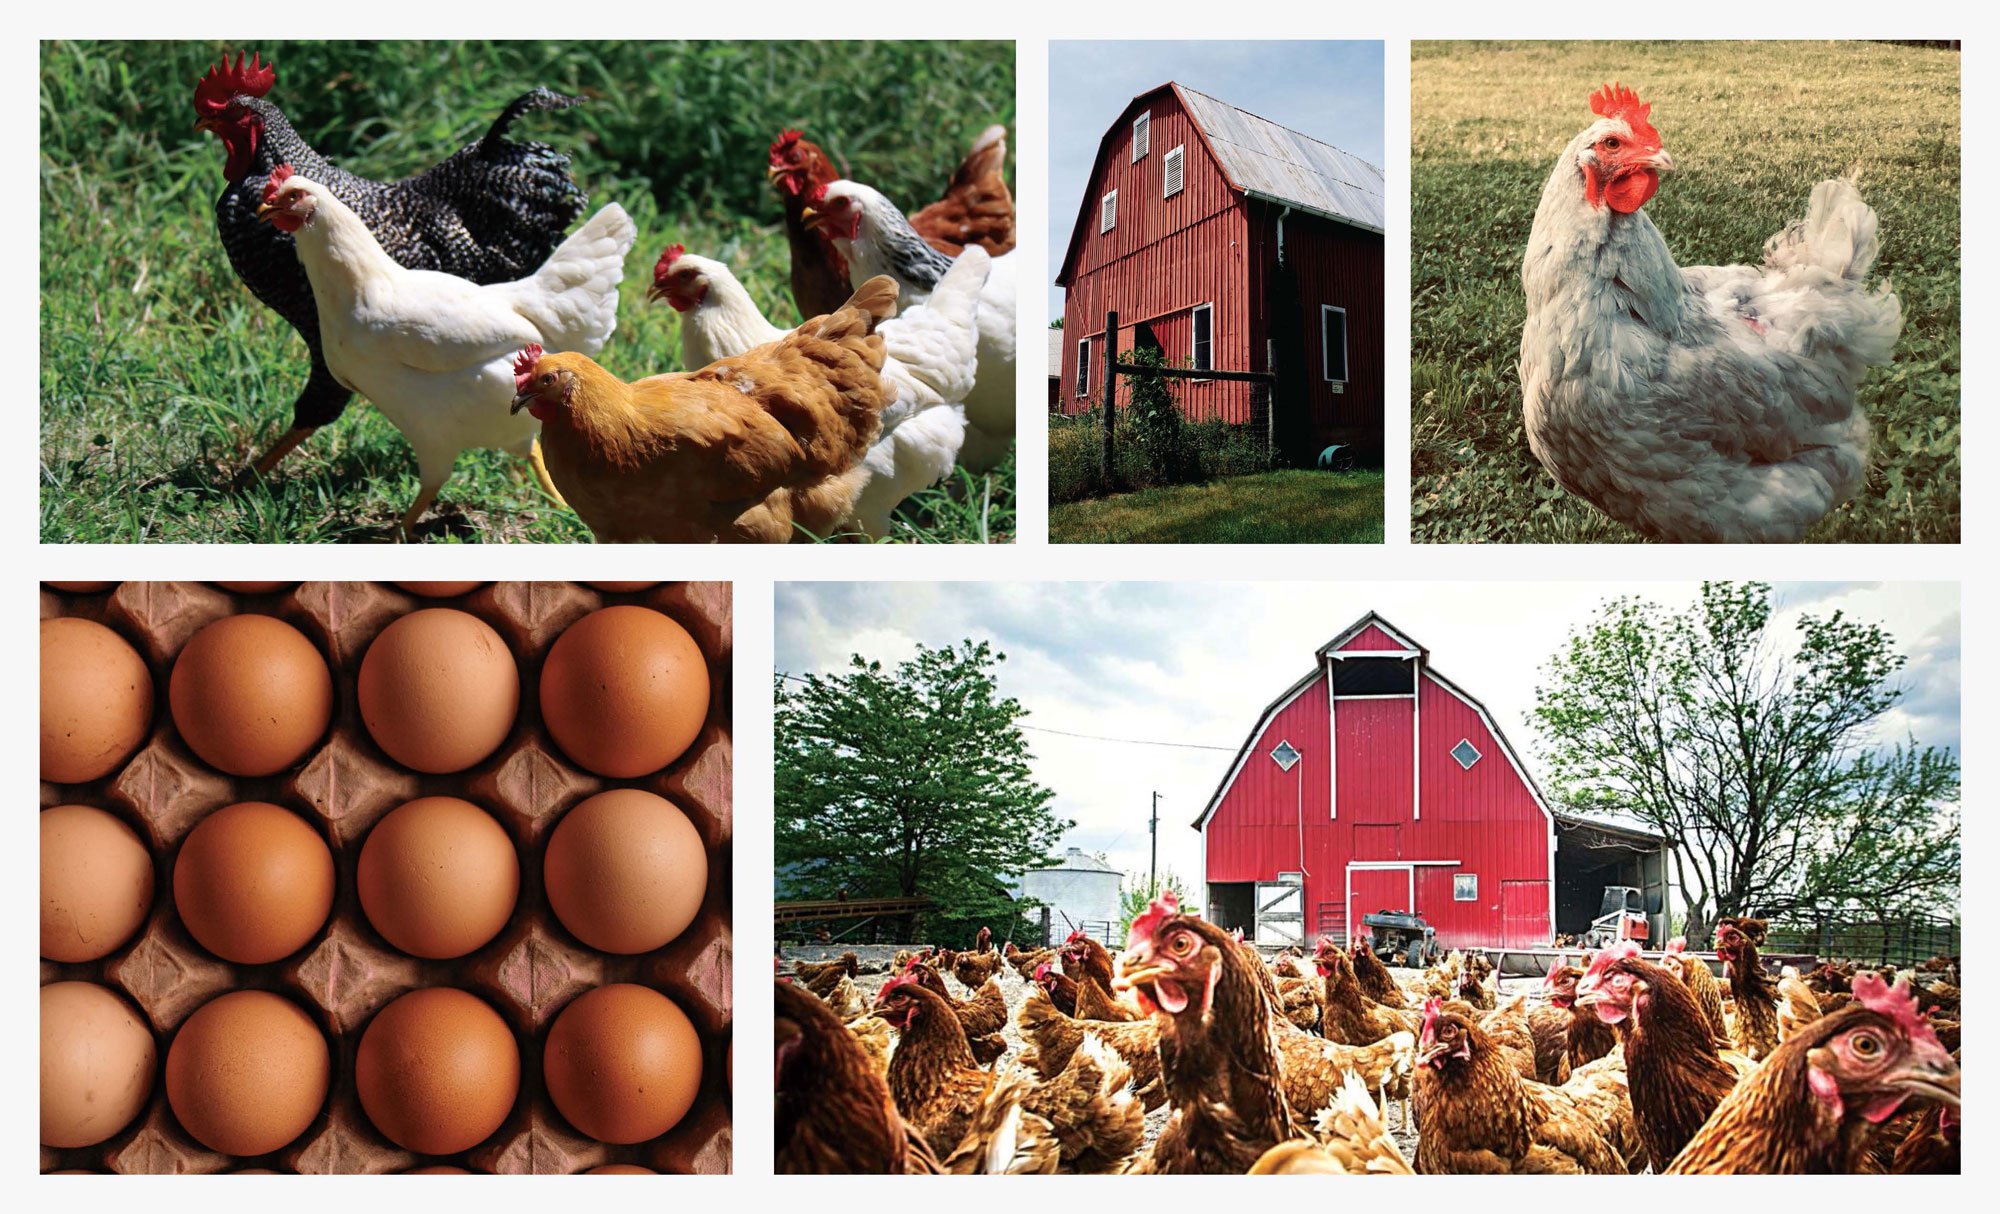  Stanton Brothers brand imagery of chickens, barns, and eggs. 